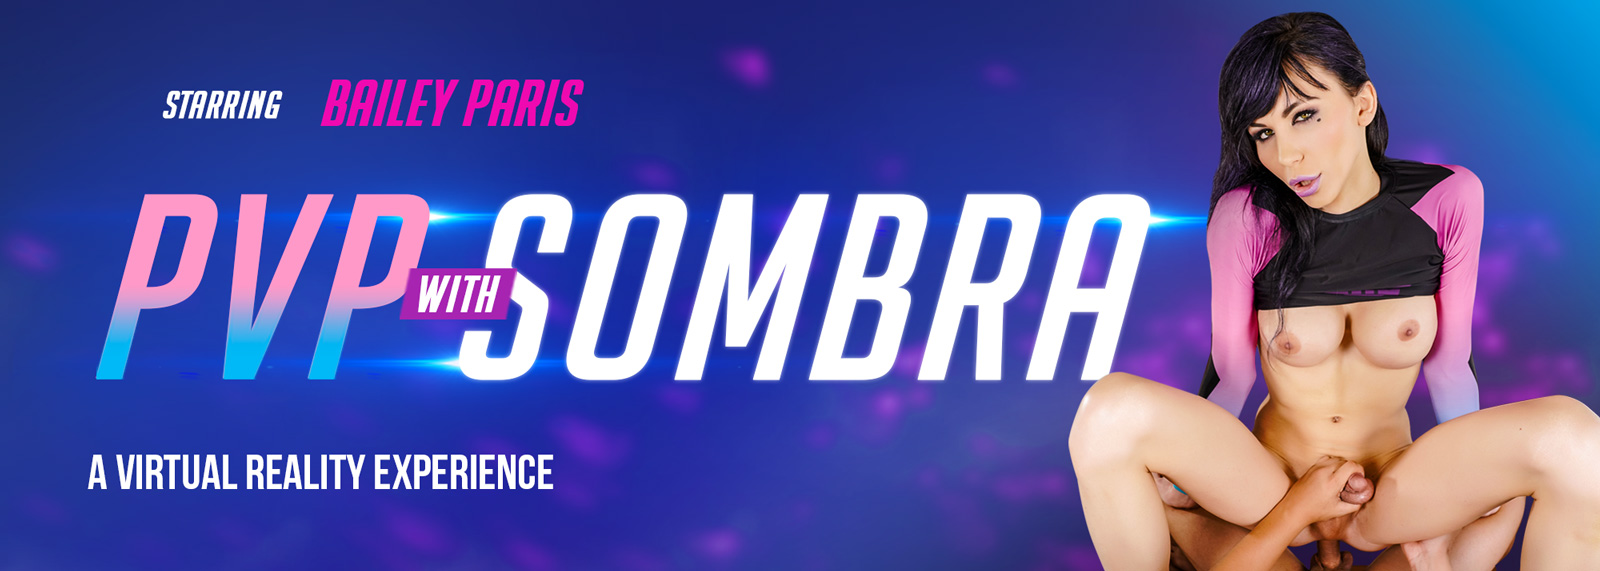 PvP With Sombra - Trans VR Porn Video, Starring: Bailey Paris